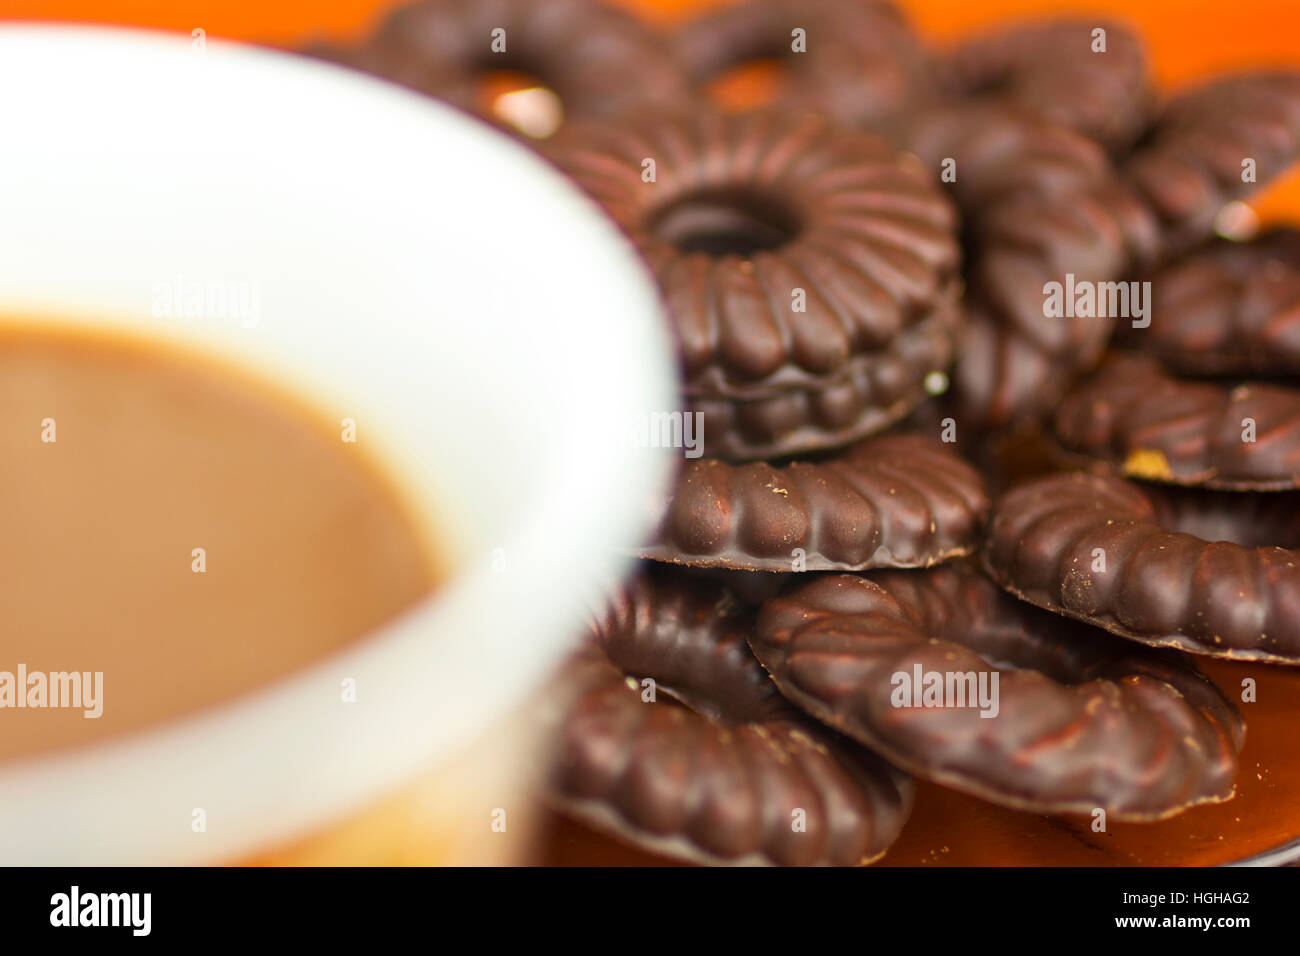 Coffee and chocolate biscuits closeup Stock Photo